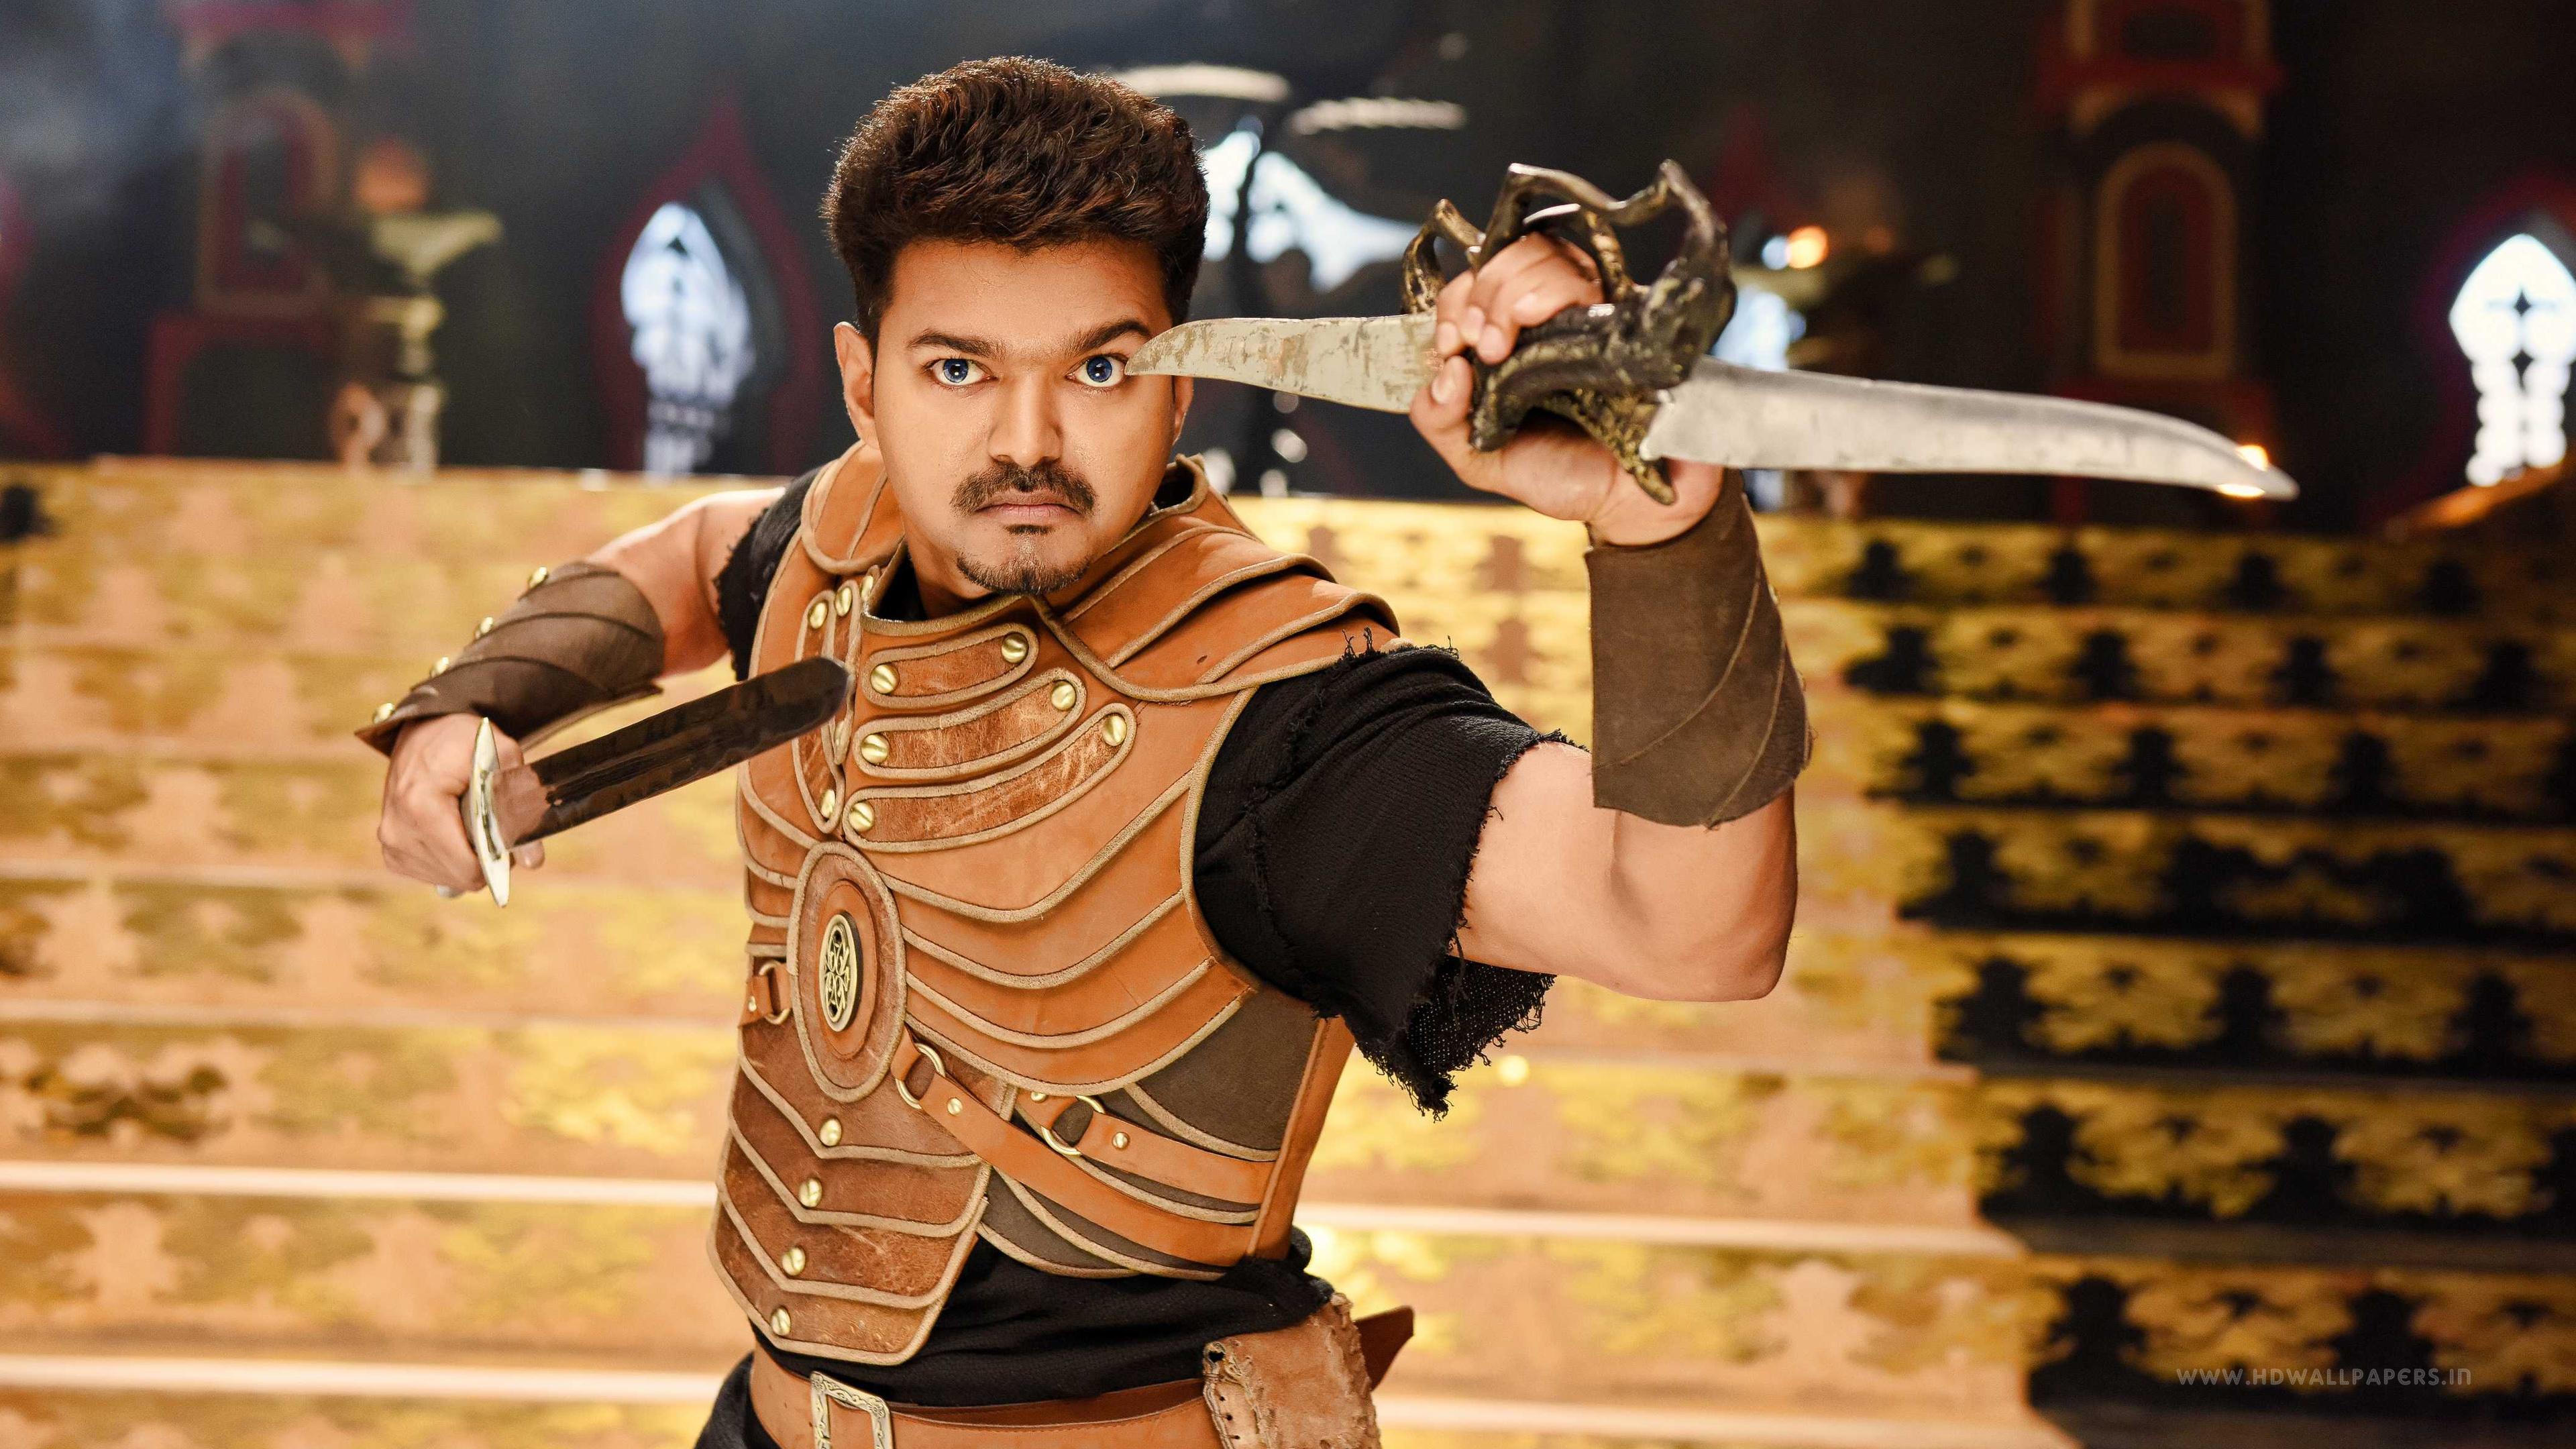 Vijay 4K wallpaper for your desktop or mobile screen free and easy to download